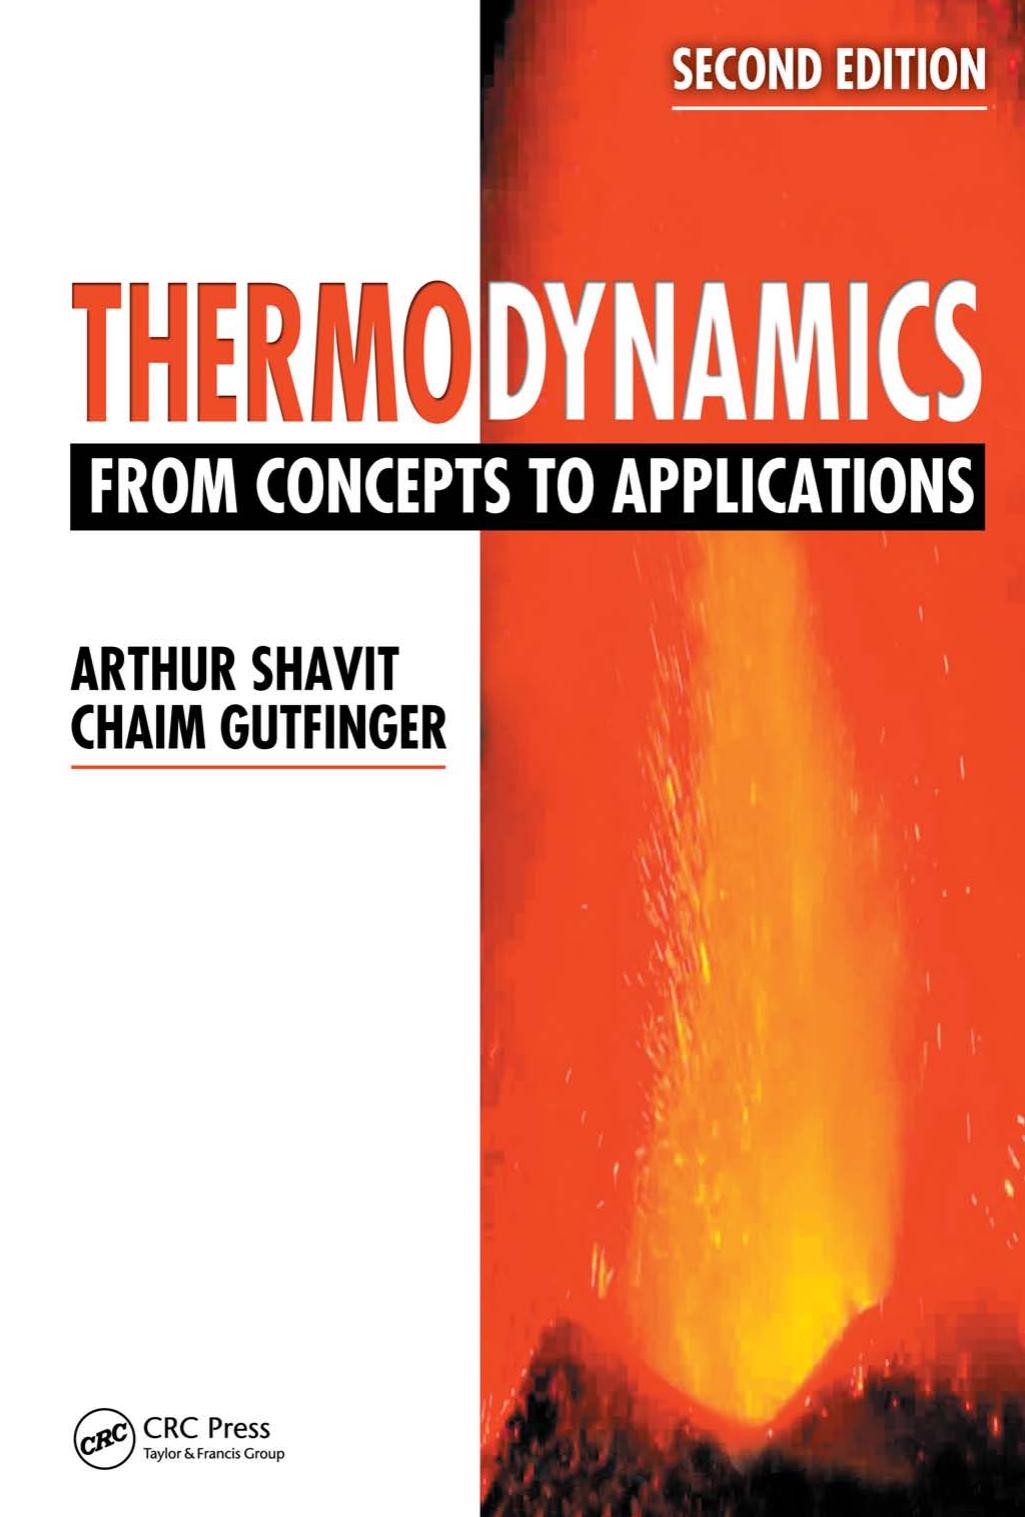 Thermodynamics From Concepts to Applications, Second Edition 2008